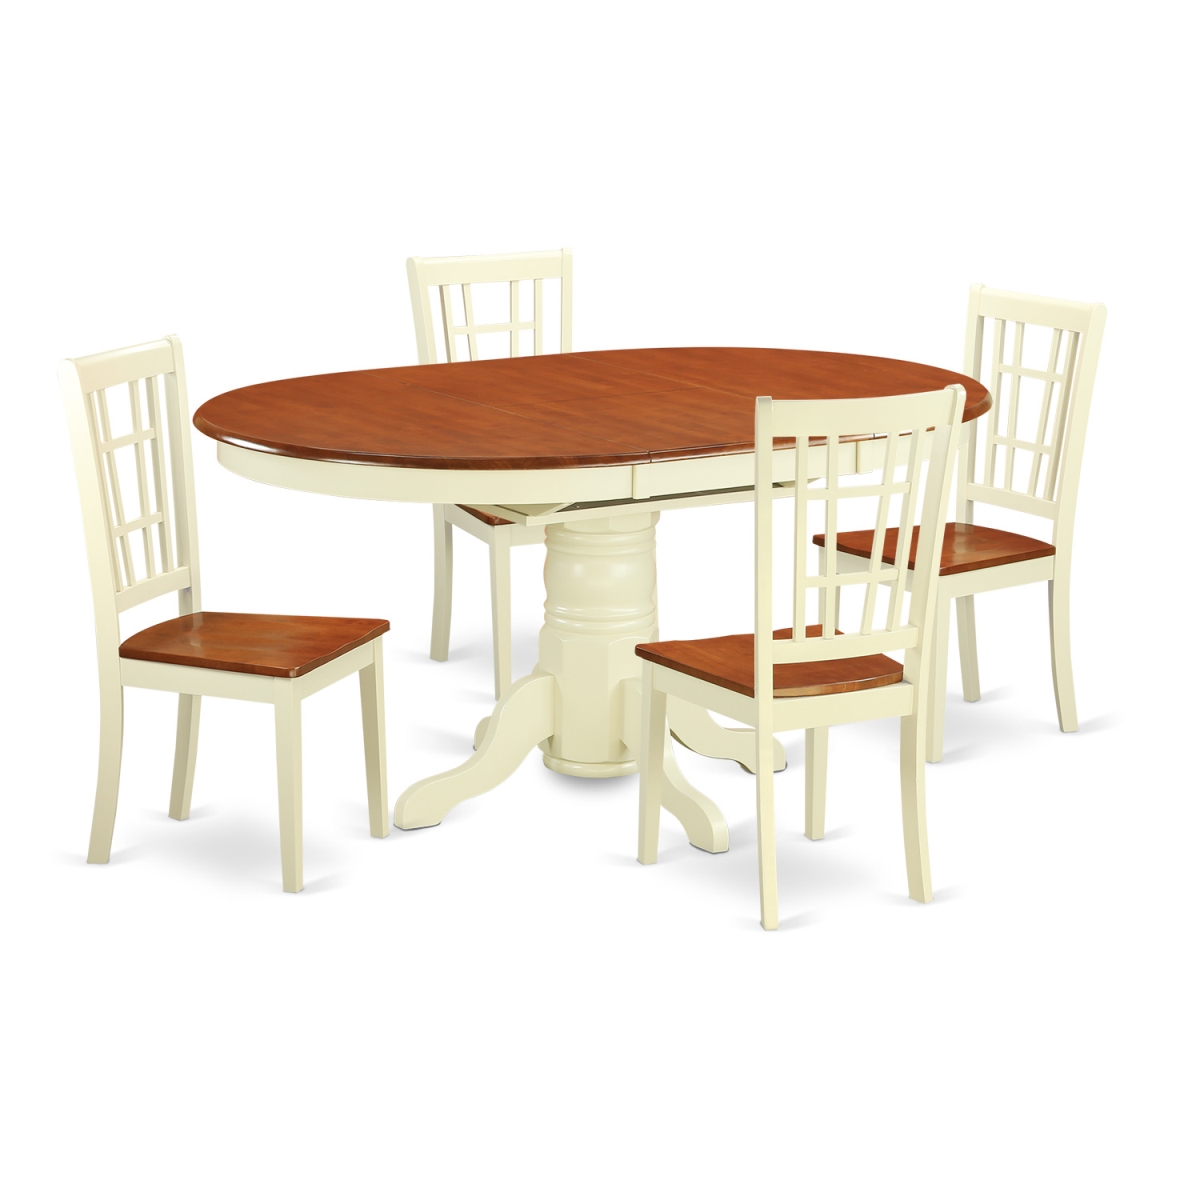 KENI5-WHI-W Kitchen Table Set with 4 Dining Room Table & 4 Chairs, Buttermilk & Cherry - 5 Piece -  East West Furniture